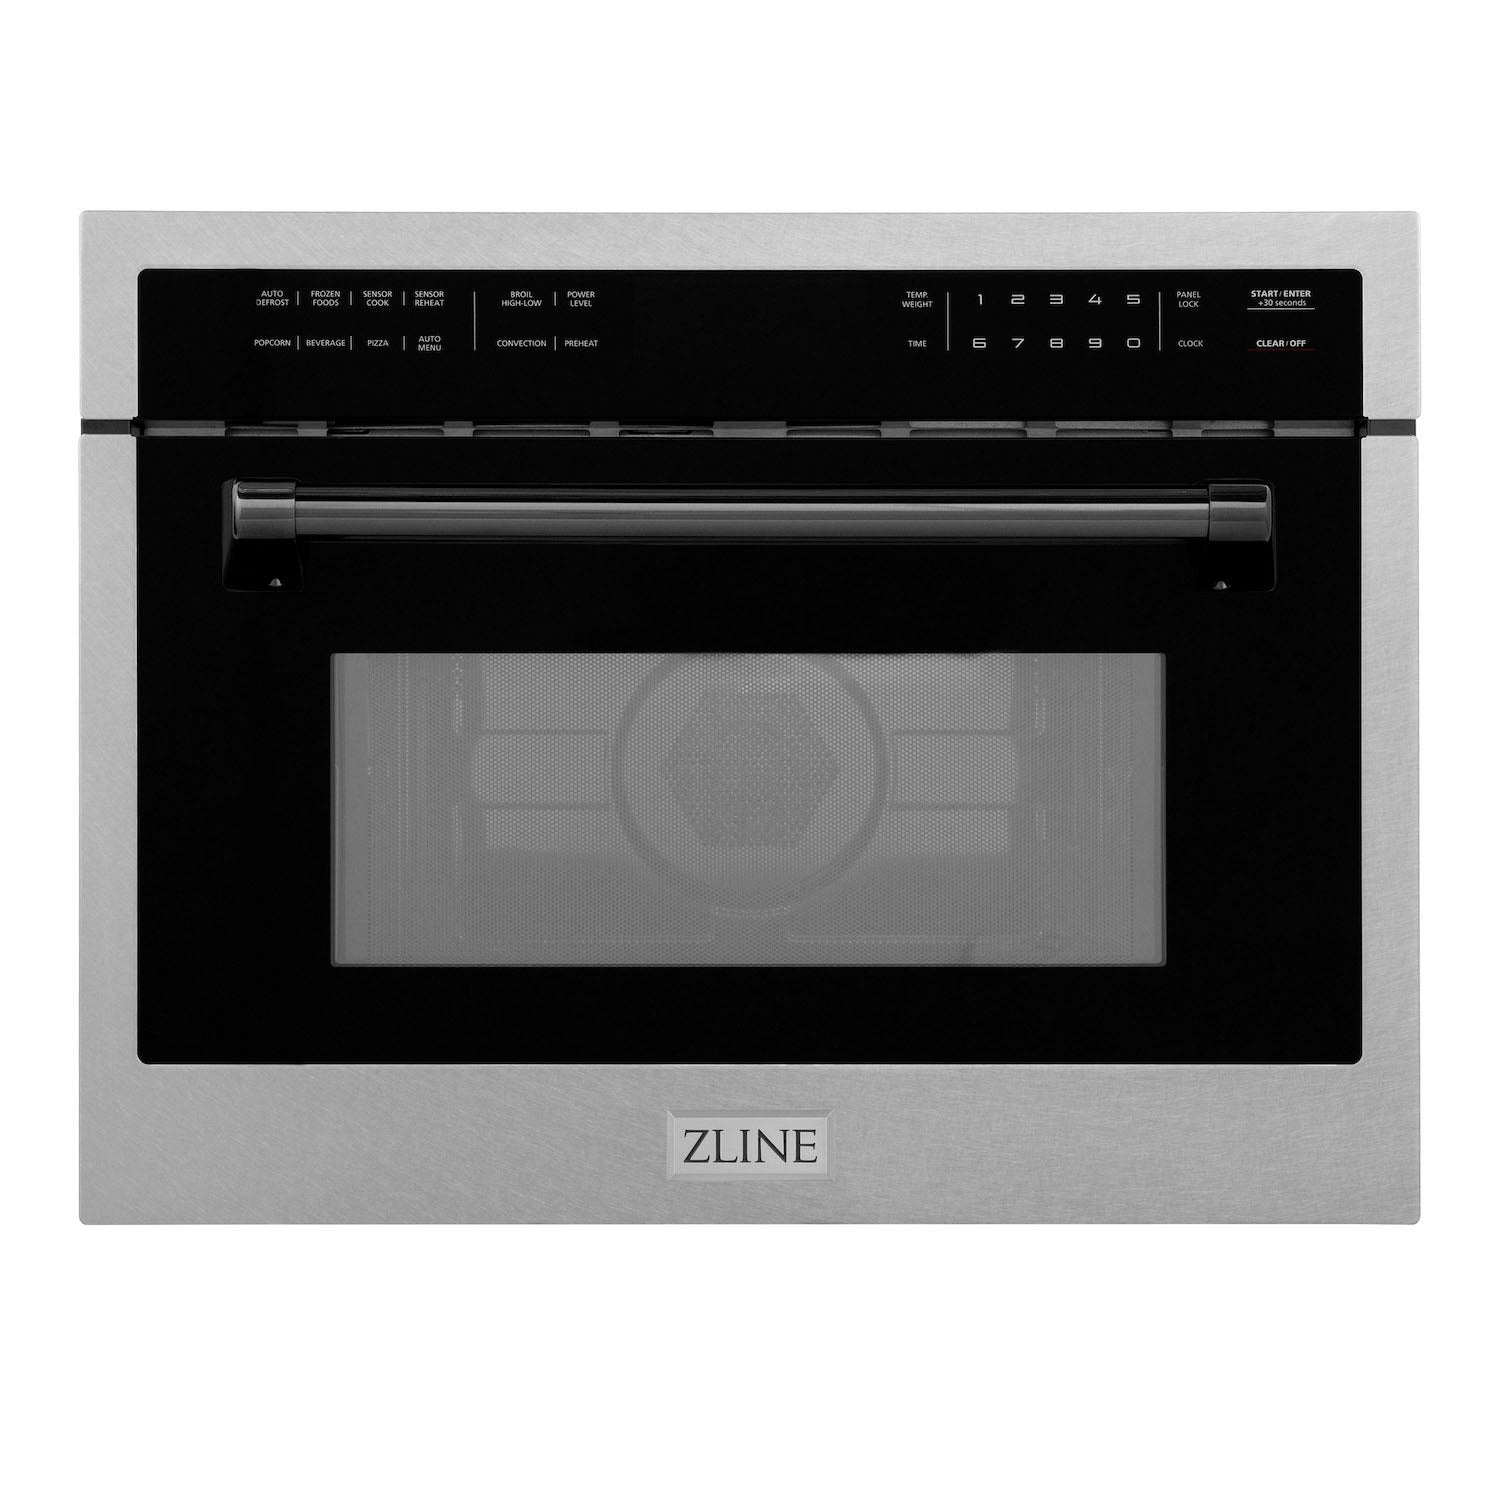 ZLINE Autograph Edition 24 in. 1.6 cu ft. Built-in Convection Microwave Oven in DuraSnow Stainless Steel with Matte Black Accents.